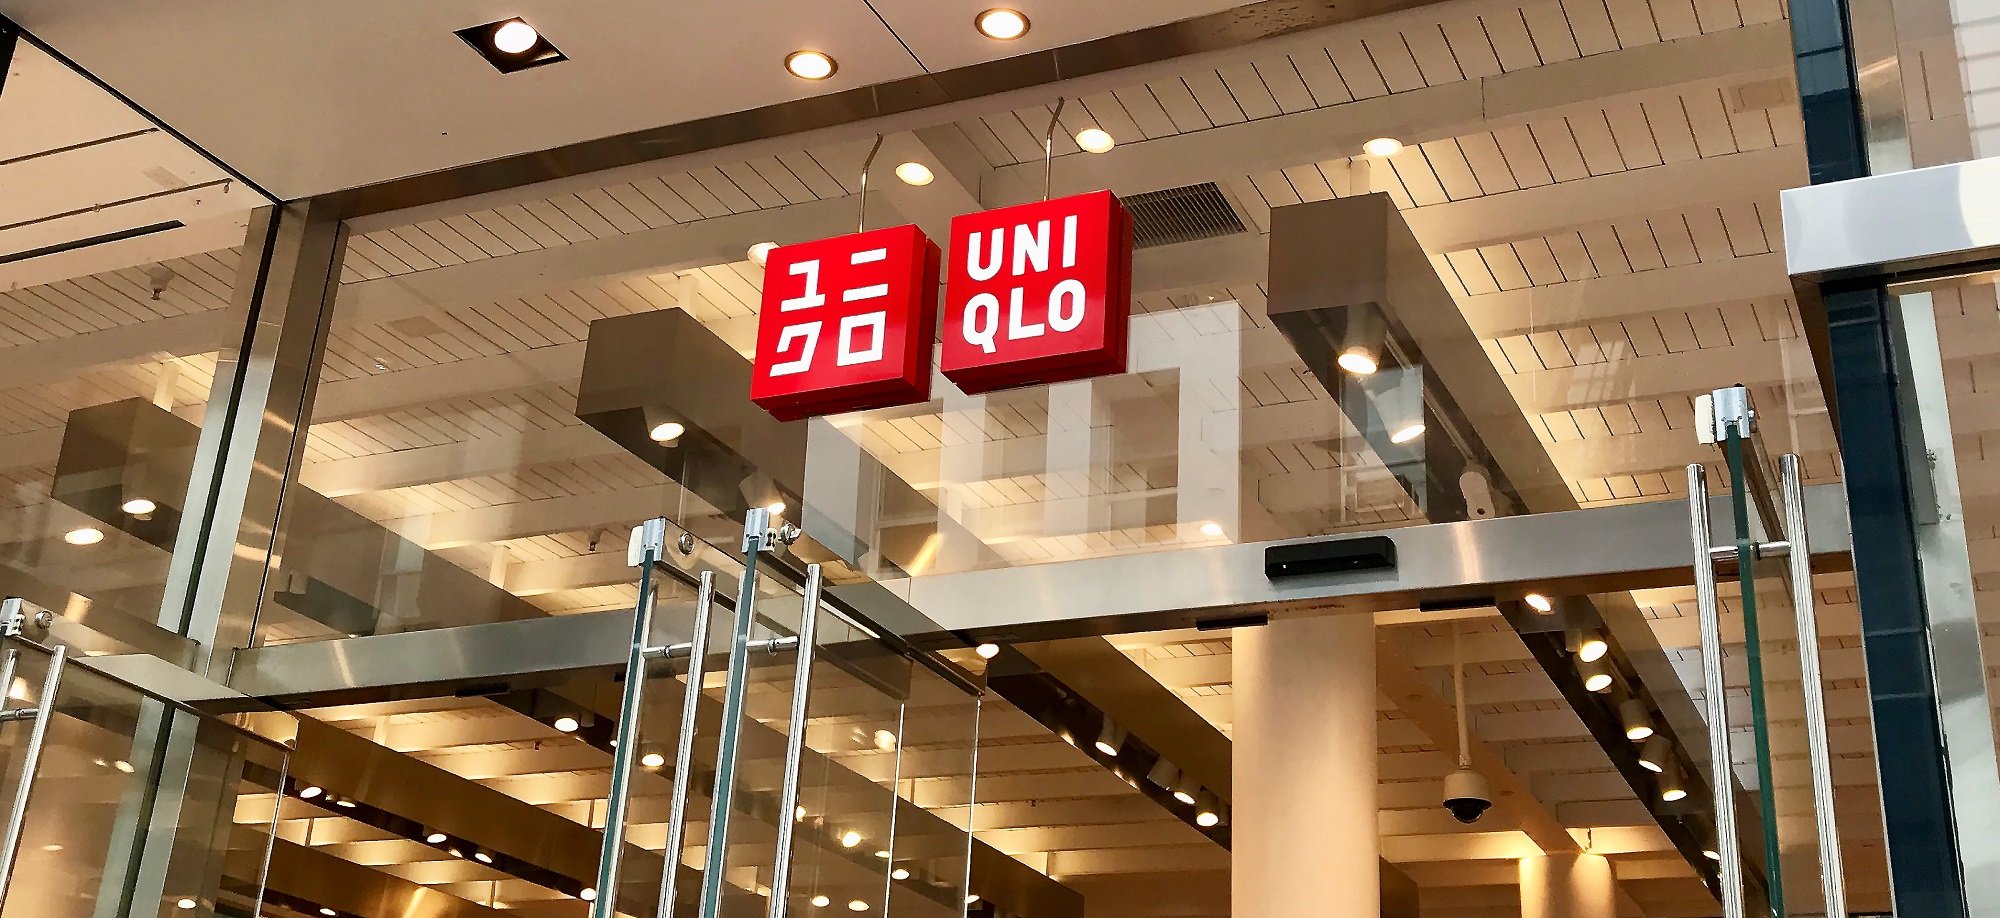 Uniqlo - The Strategy Behind The Global Japanese Fast Fashion Retail Brand - Martin Roll